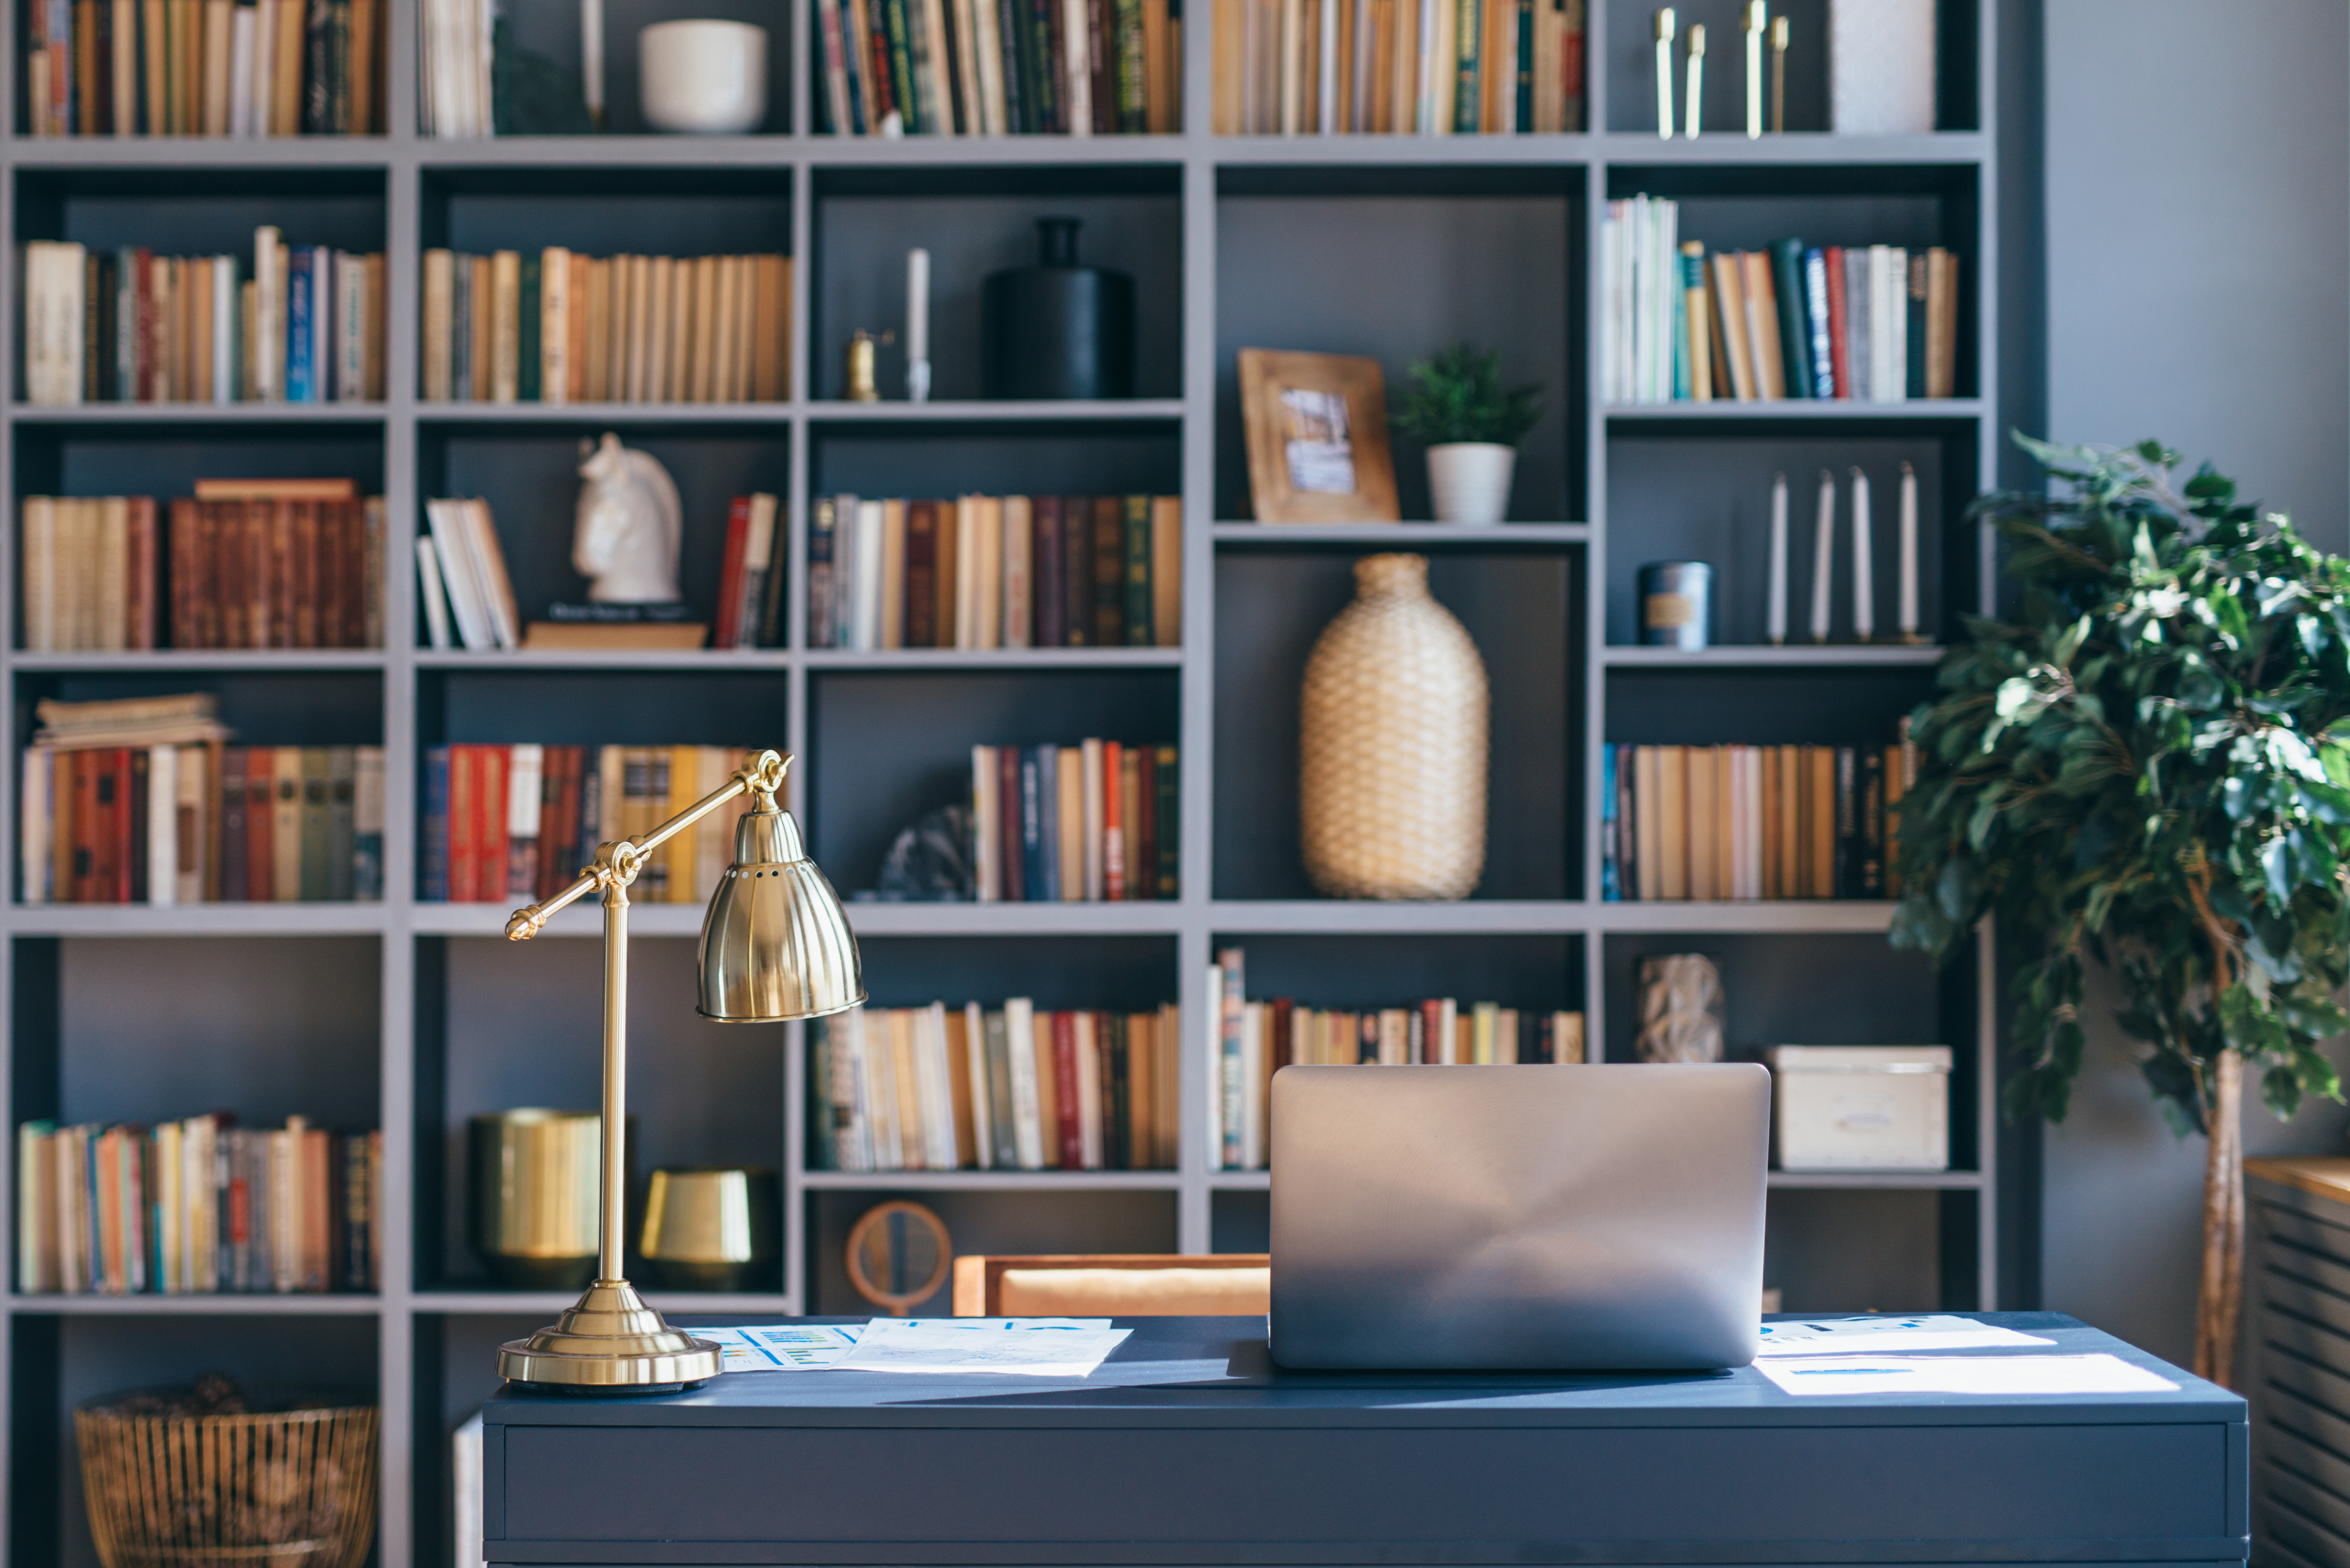 A private home office with a laptop and a shelves with books | Source: Shutterstock